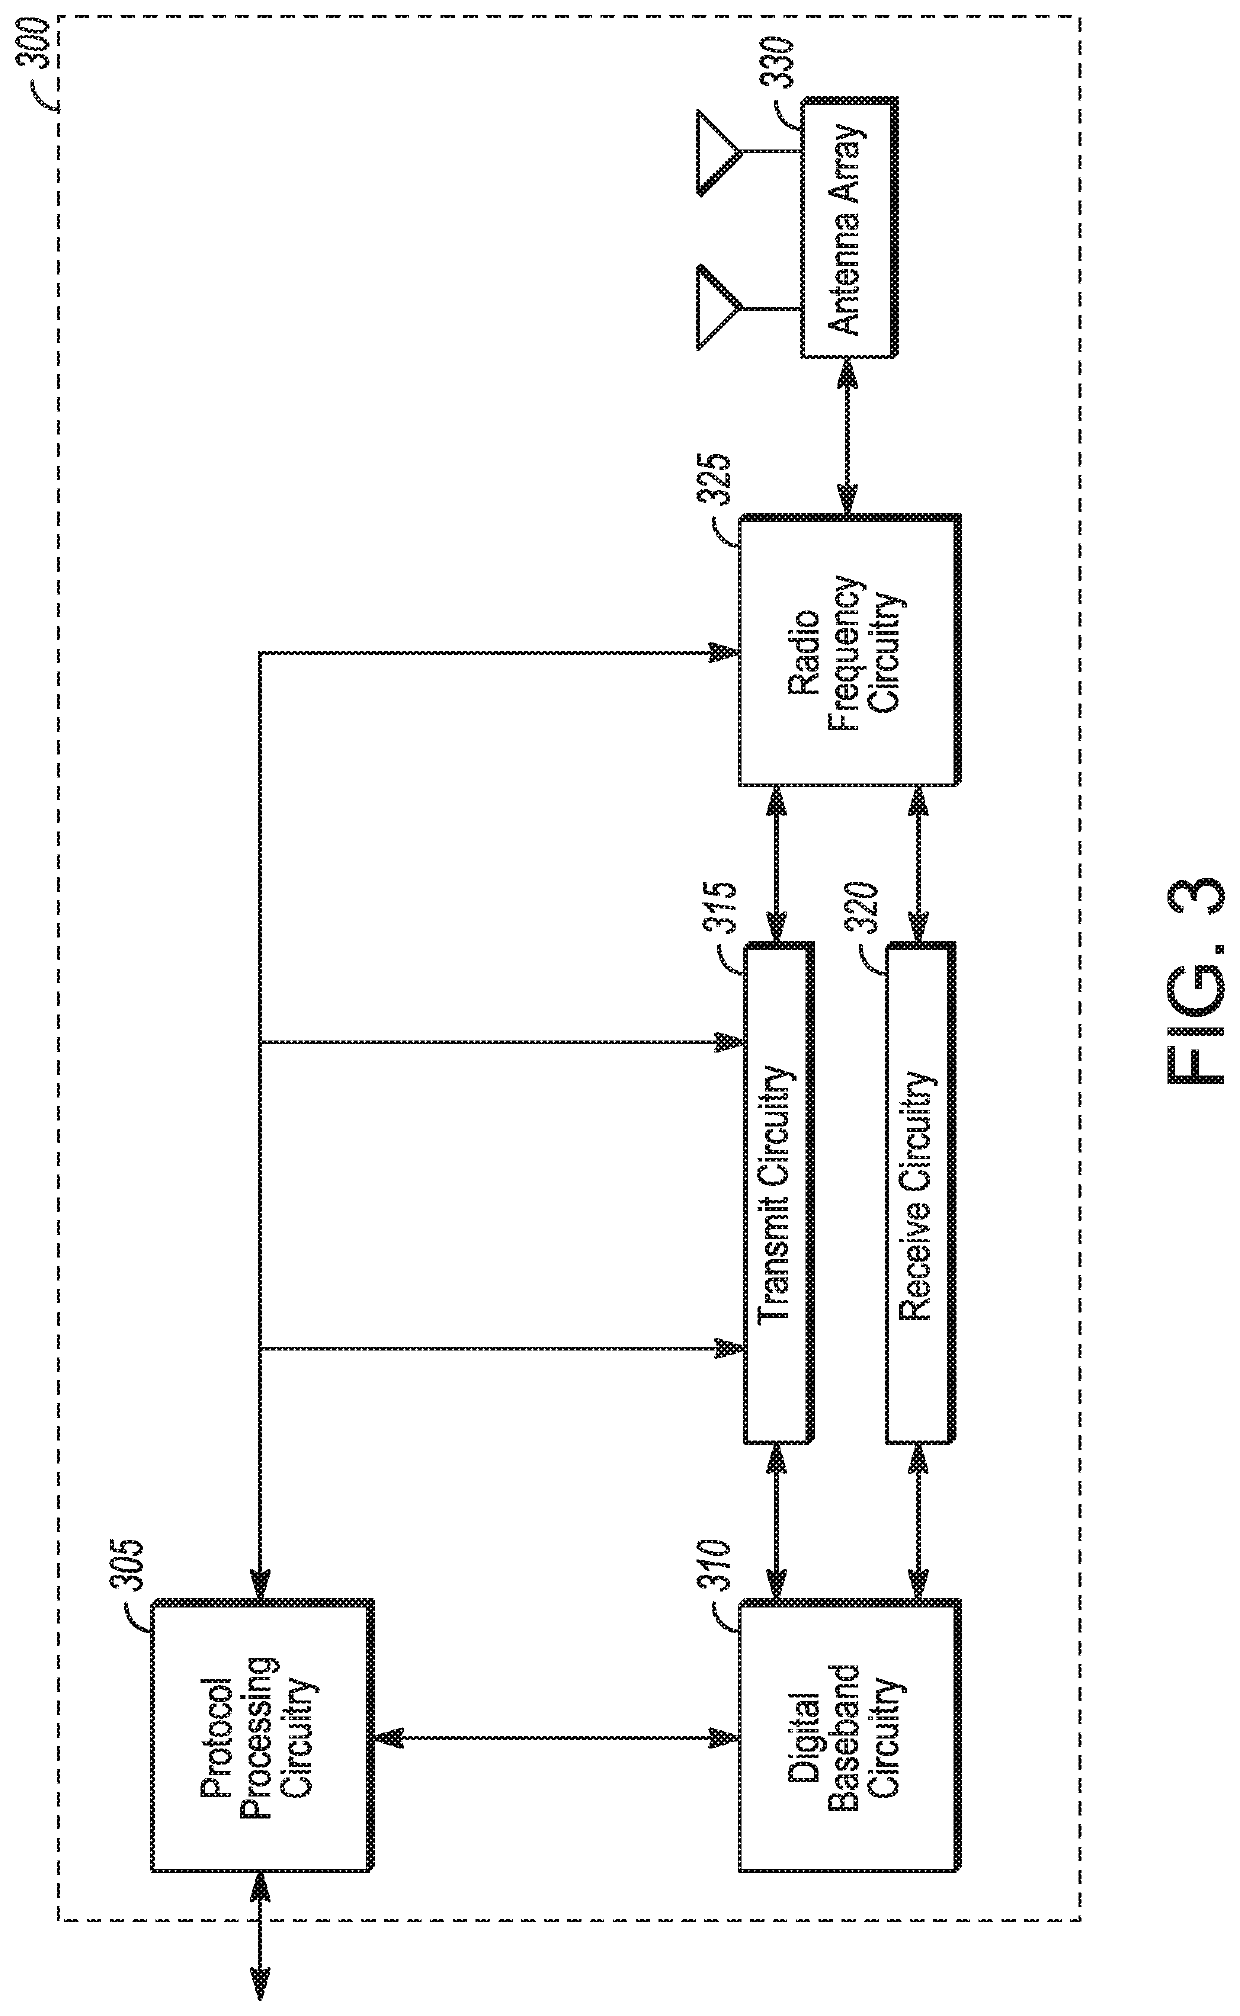 System and method using collaborative learning of interference environment and network topology for autonomous spectrum sharing